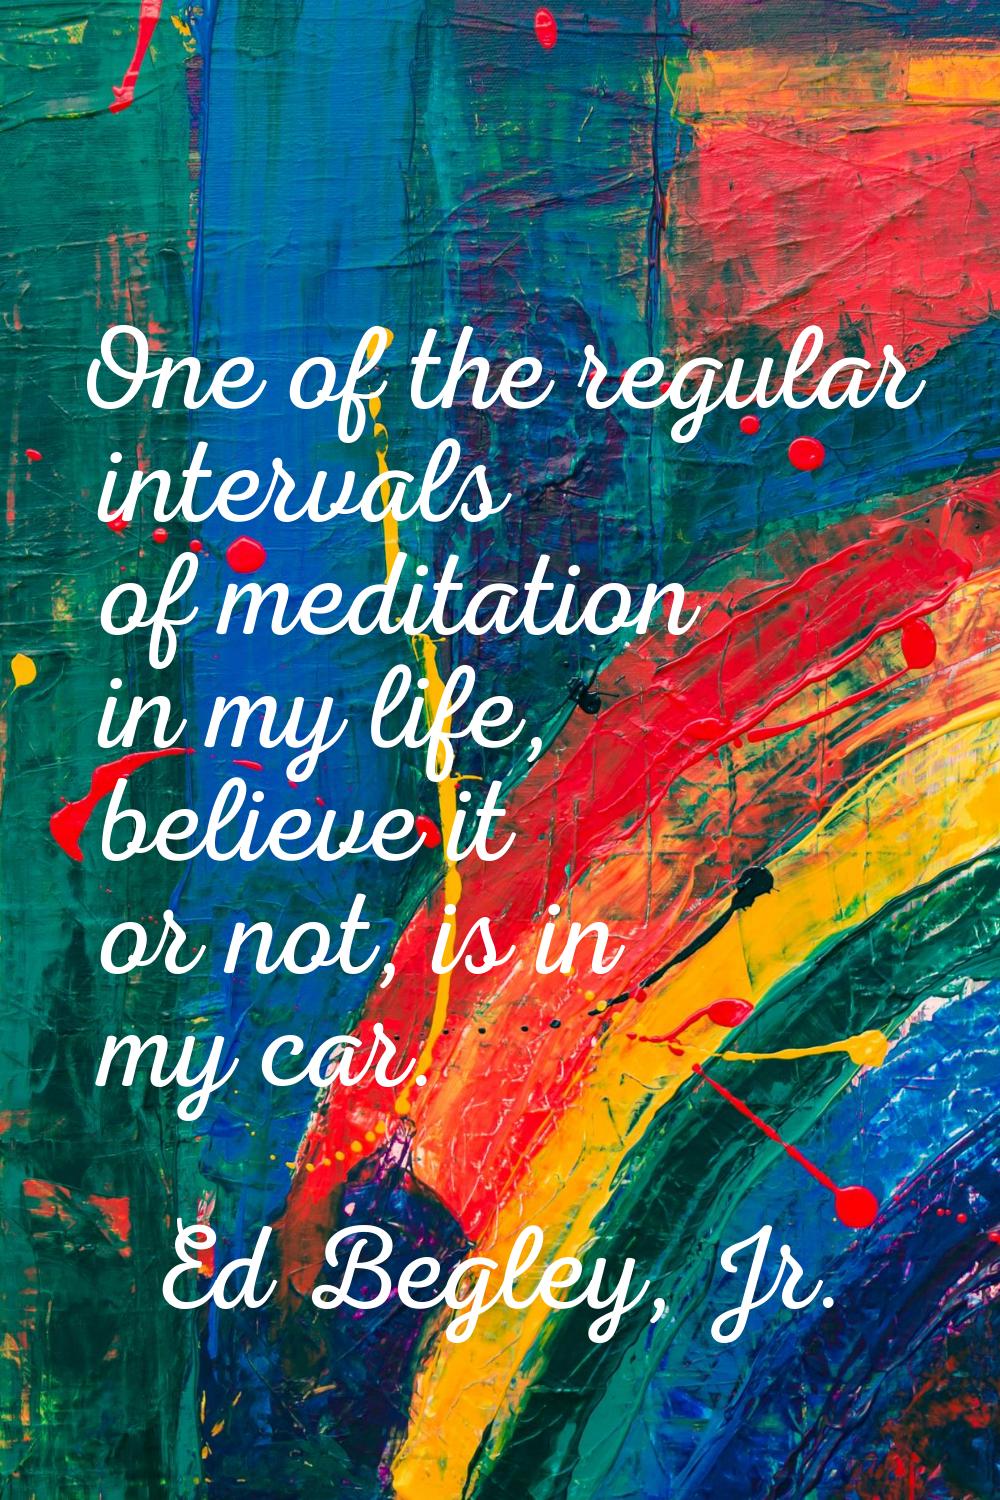 One of the regular intervals of meditation in my life, believe it or not, is in my car.